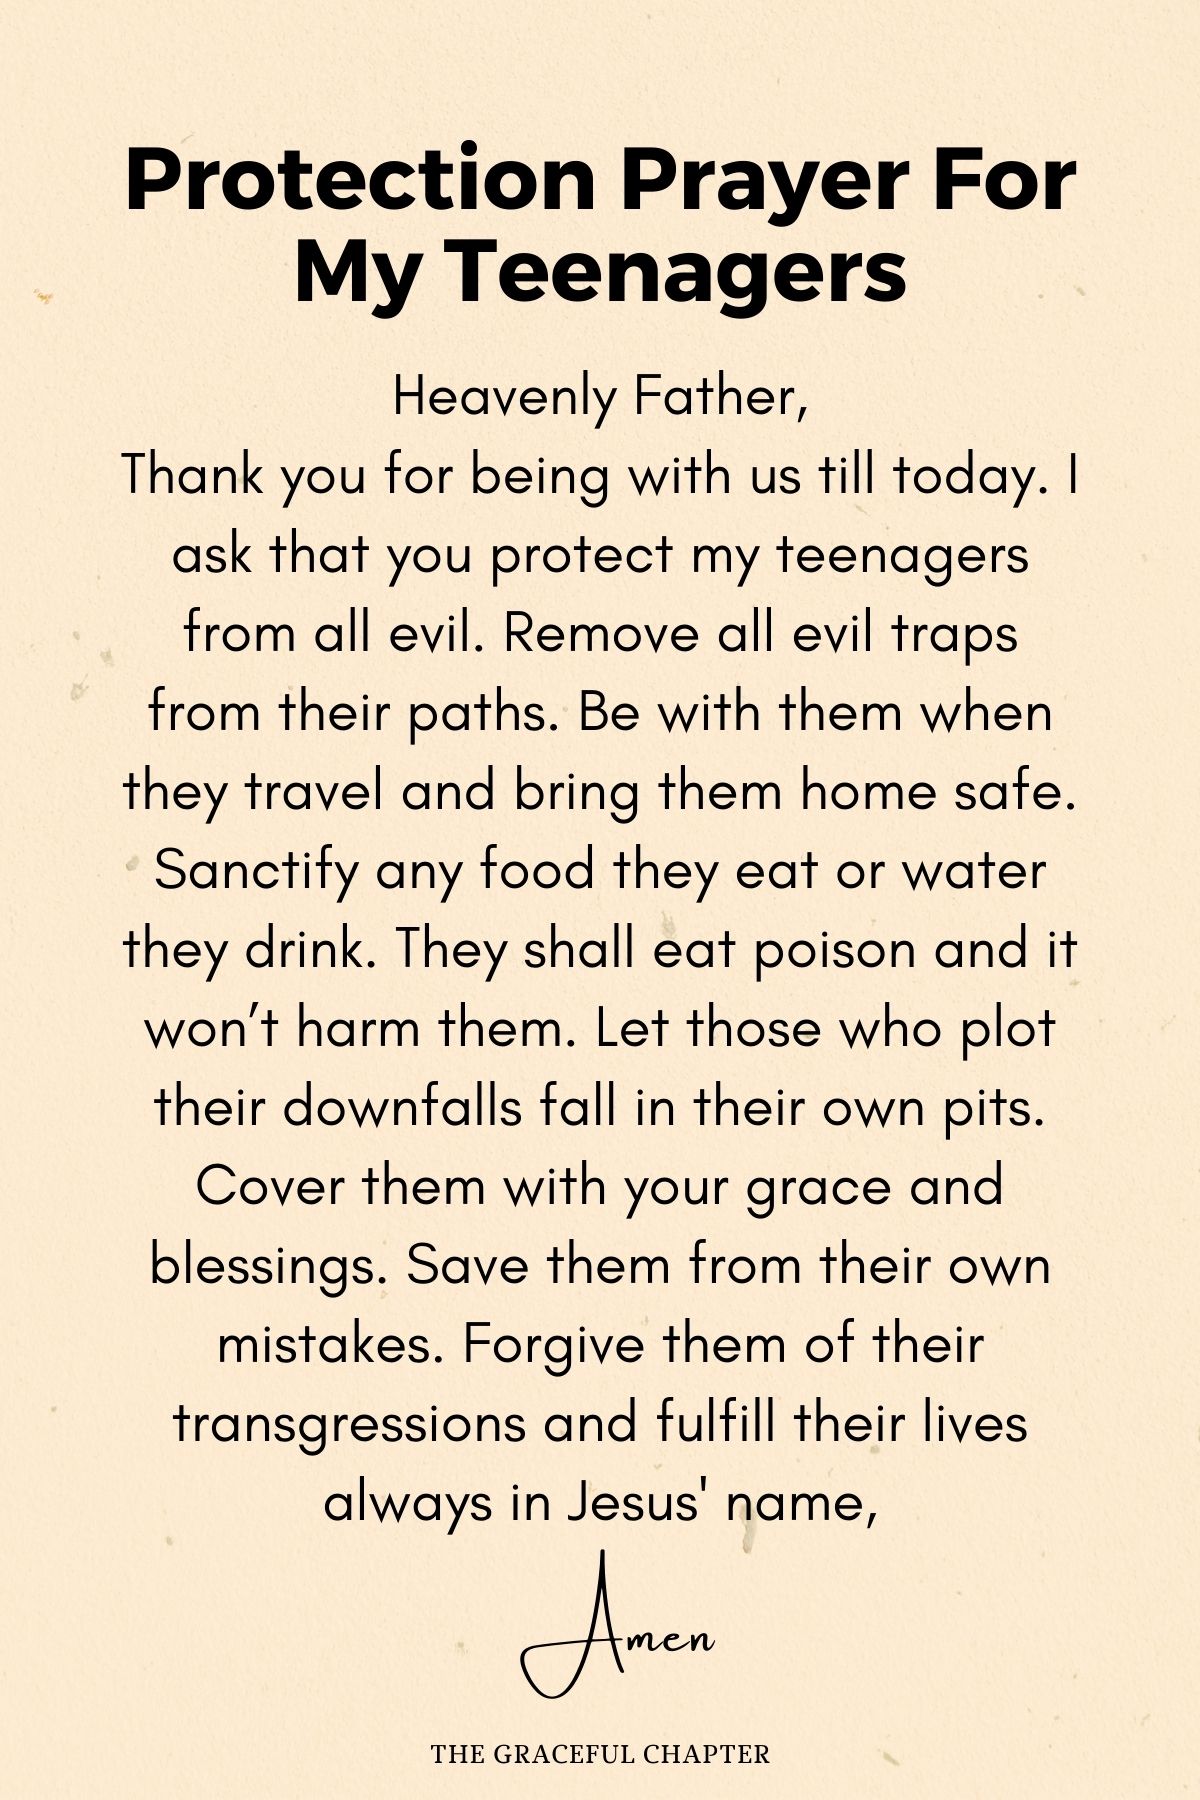 Protection prayer for my teenagers